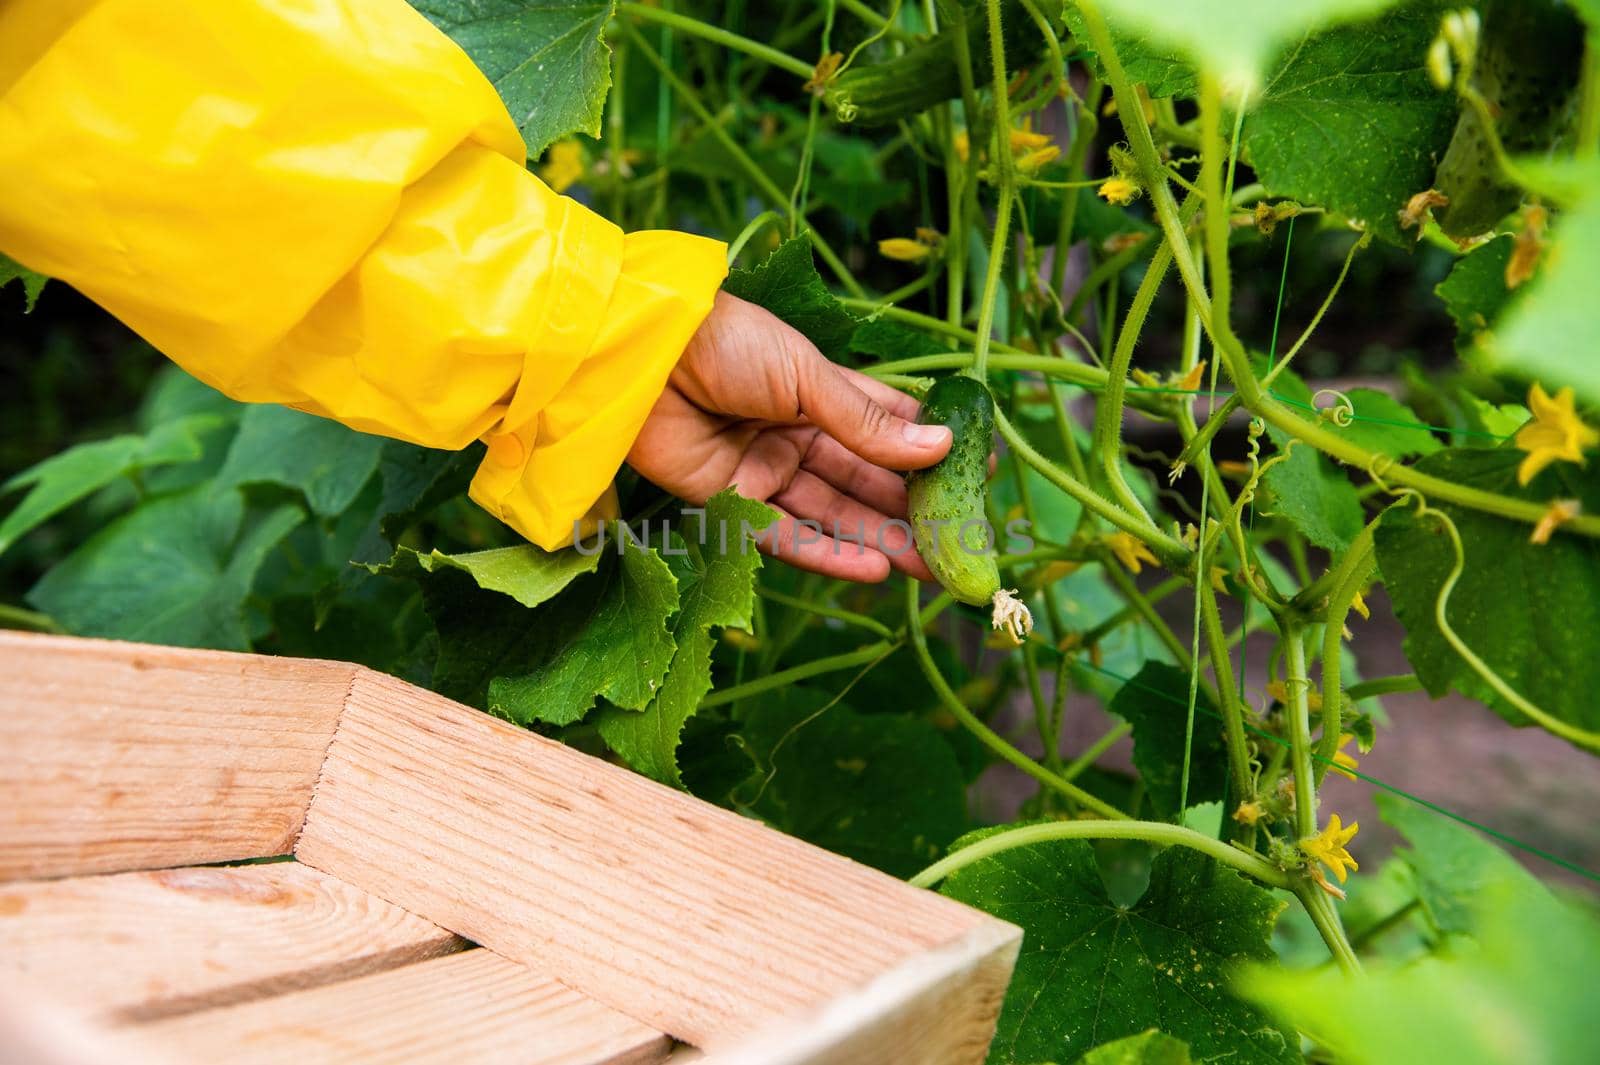 Details: Gardener's hand picking up cucumber cultivated in an organic eco farm. Cultivation of ecologically friendly vegetables in the allotment garden. Growing homegrown products and harvesting crop